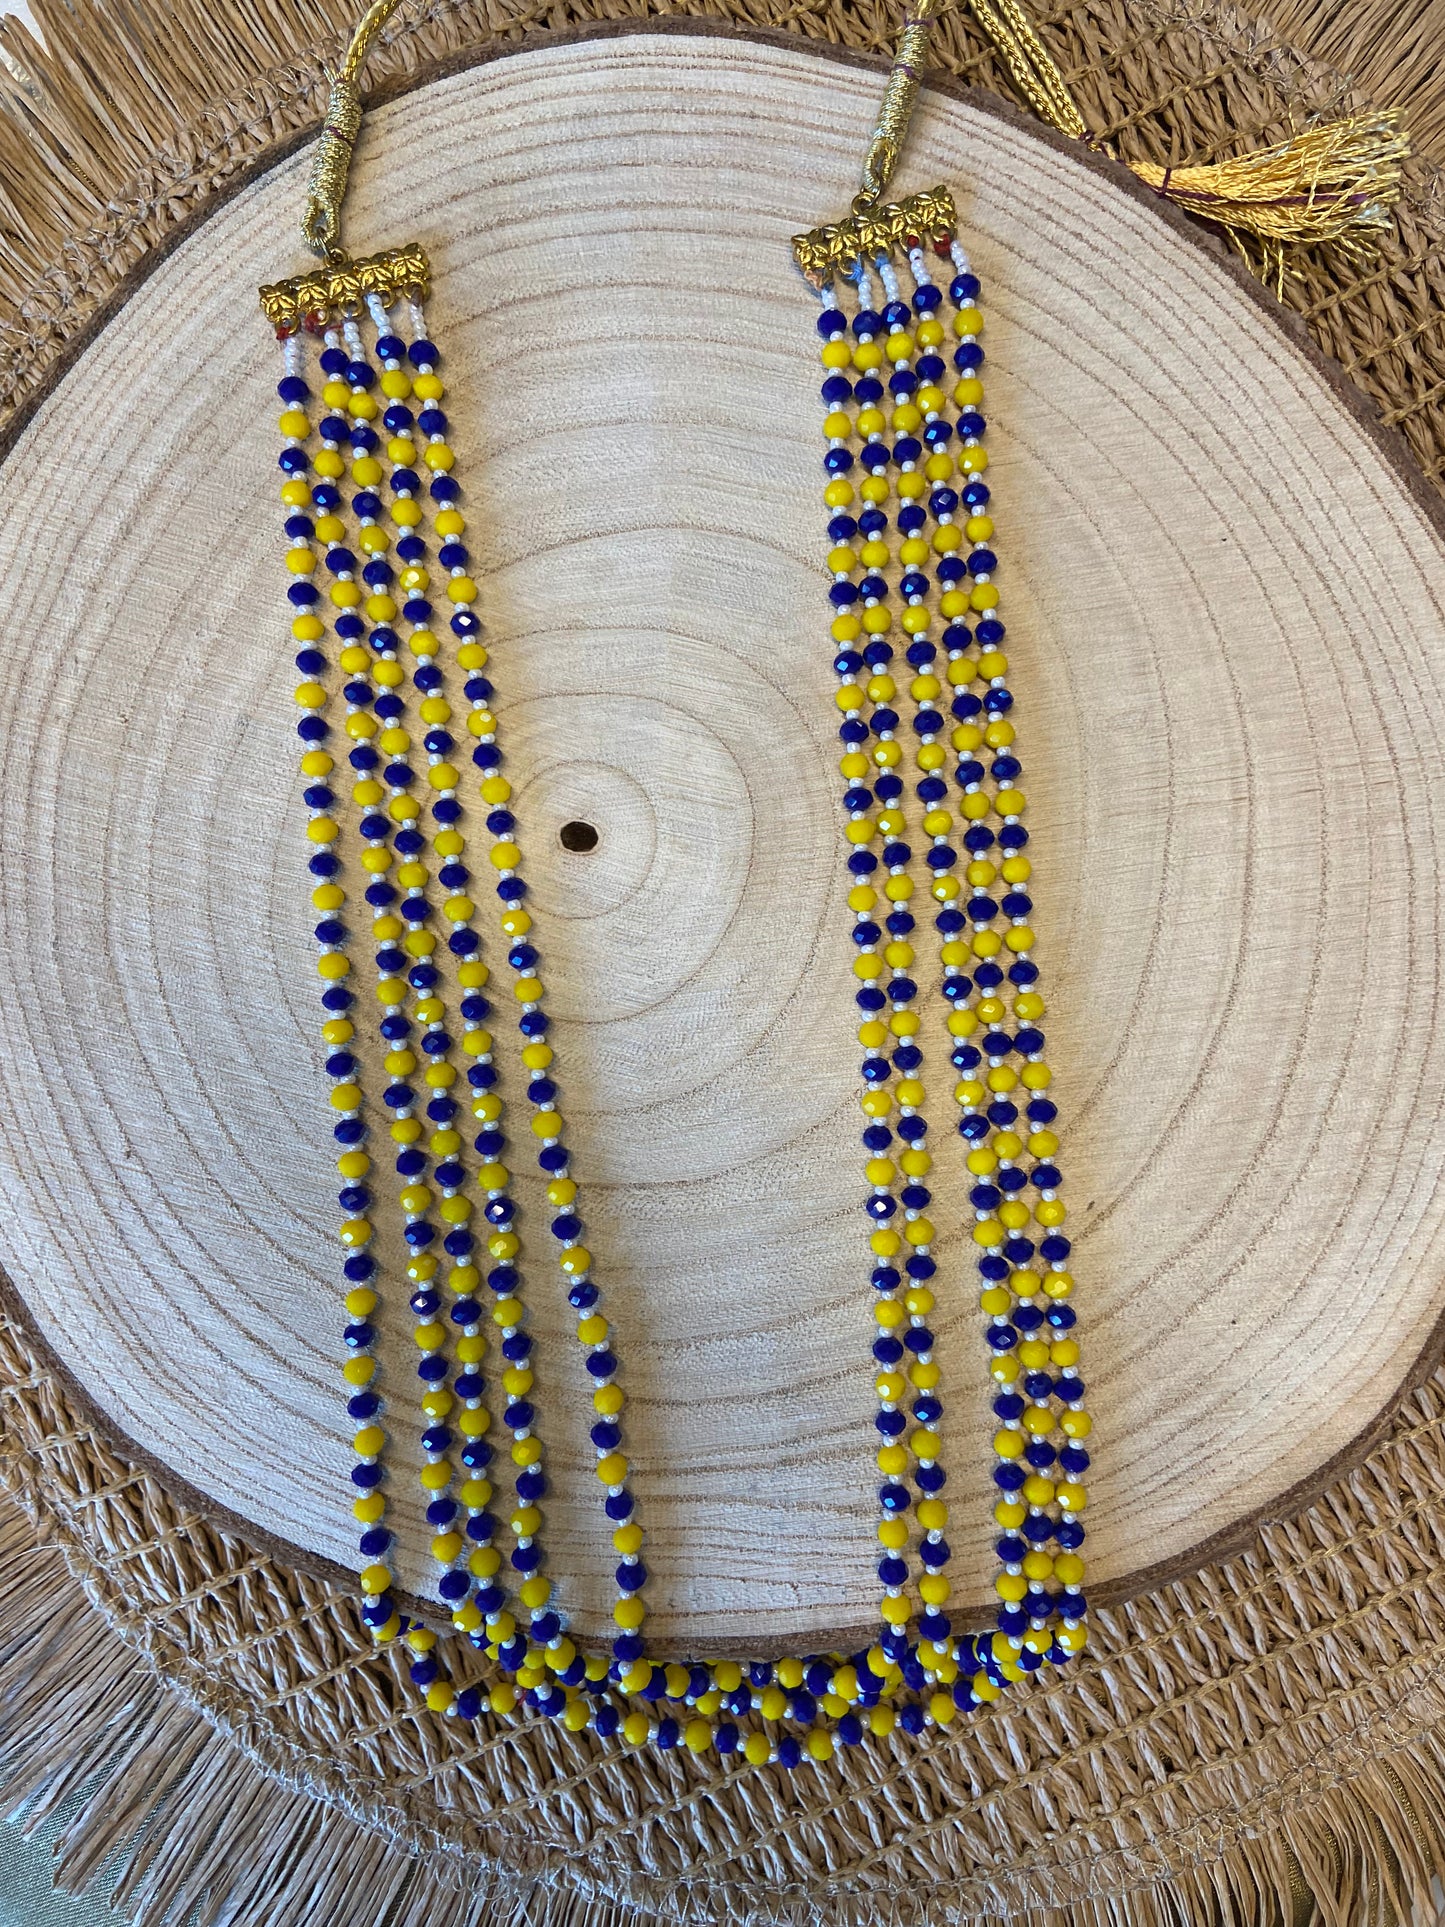 Ketten - 5 layer beaded necklace in yellow and blue colour